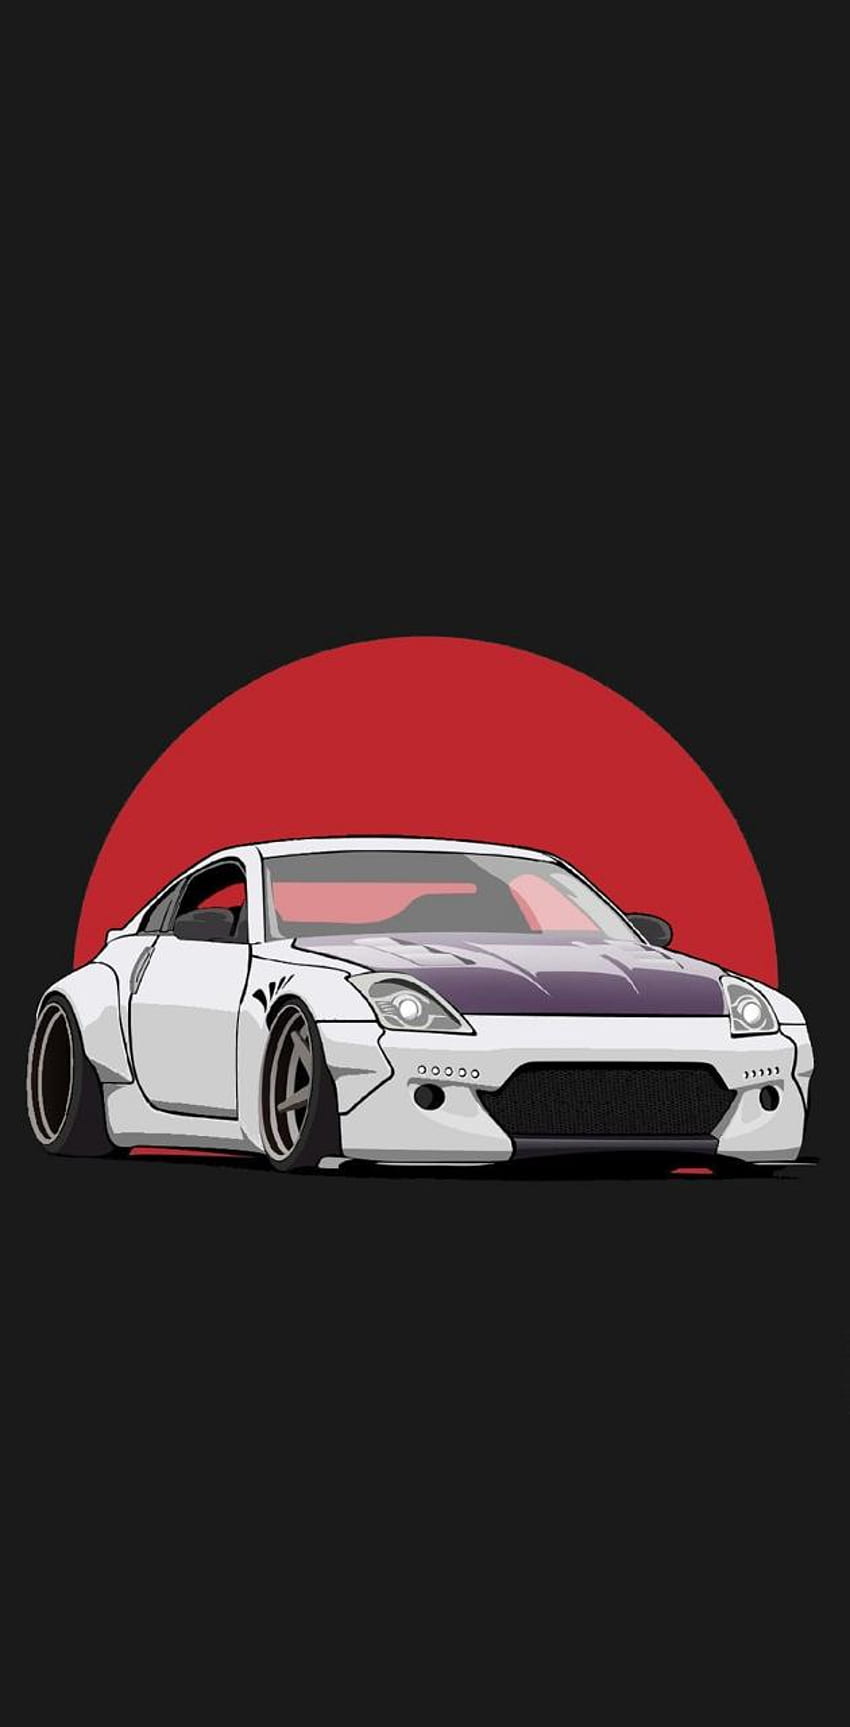 New Nissan Z  Heres a Z wallpaper that works on smartphones more  httpswwwnewnissanzcomthreads2023nissanzsportscarwallpapers892   Facebook